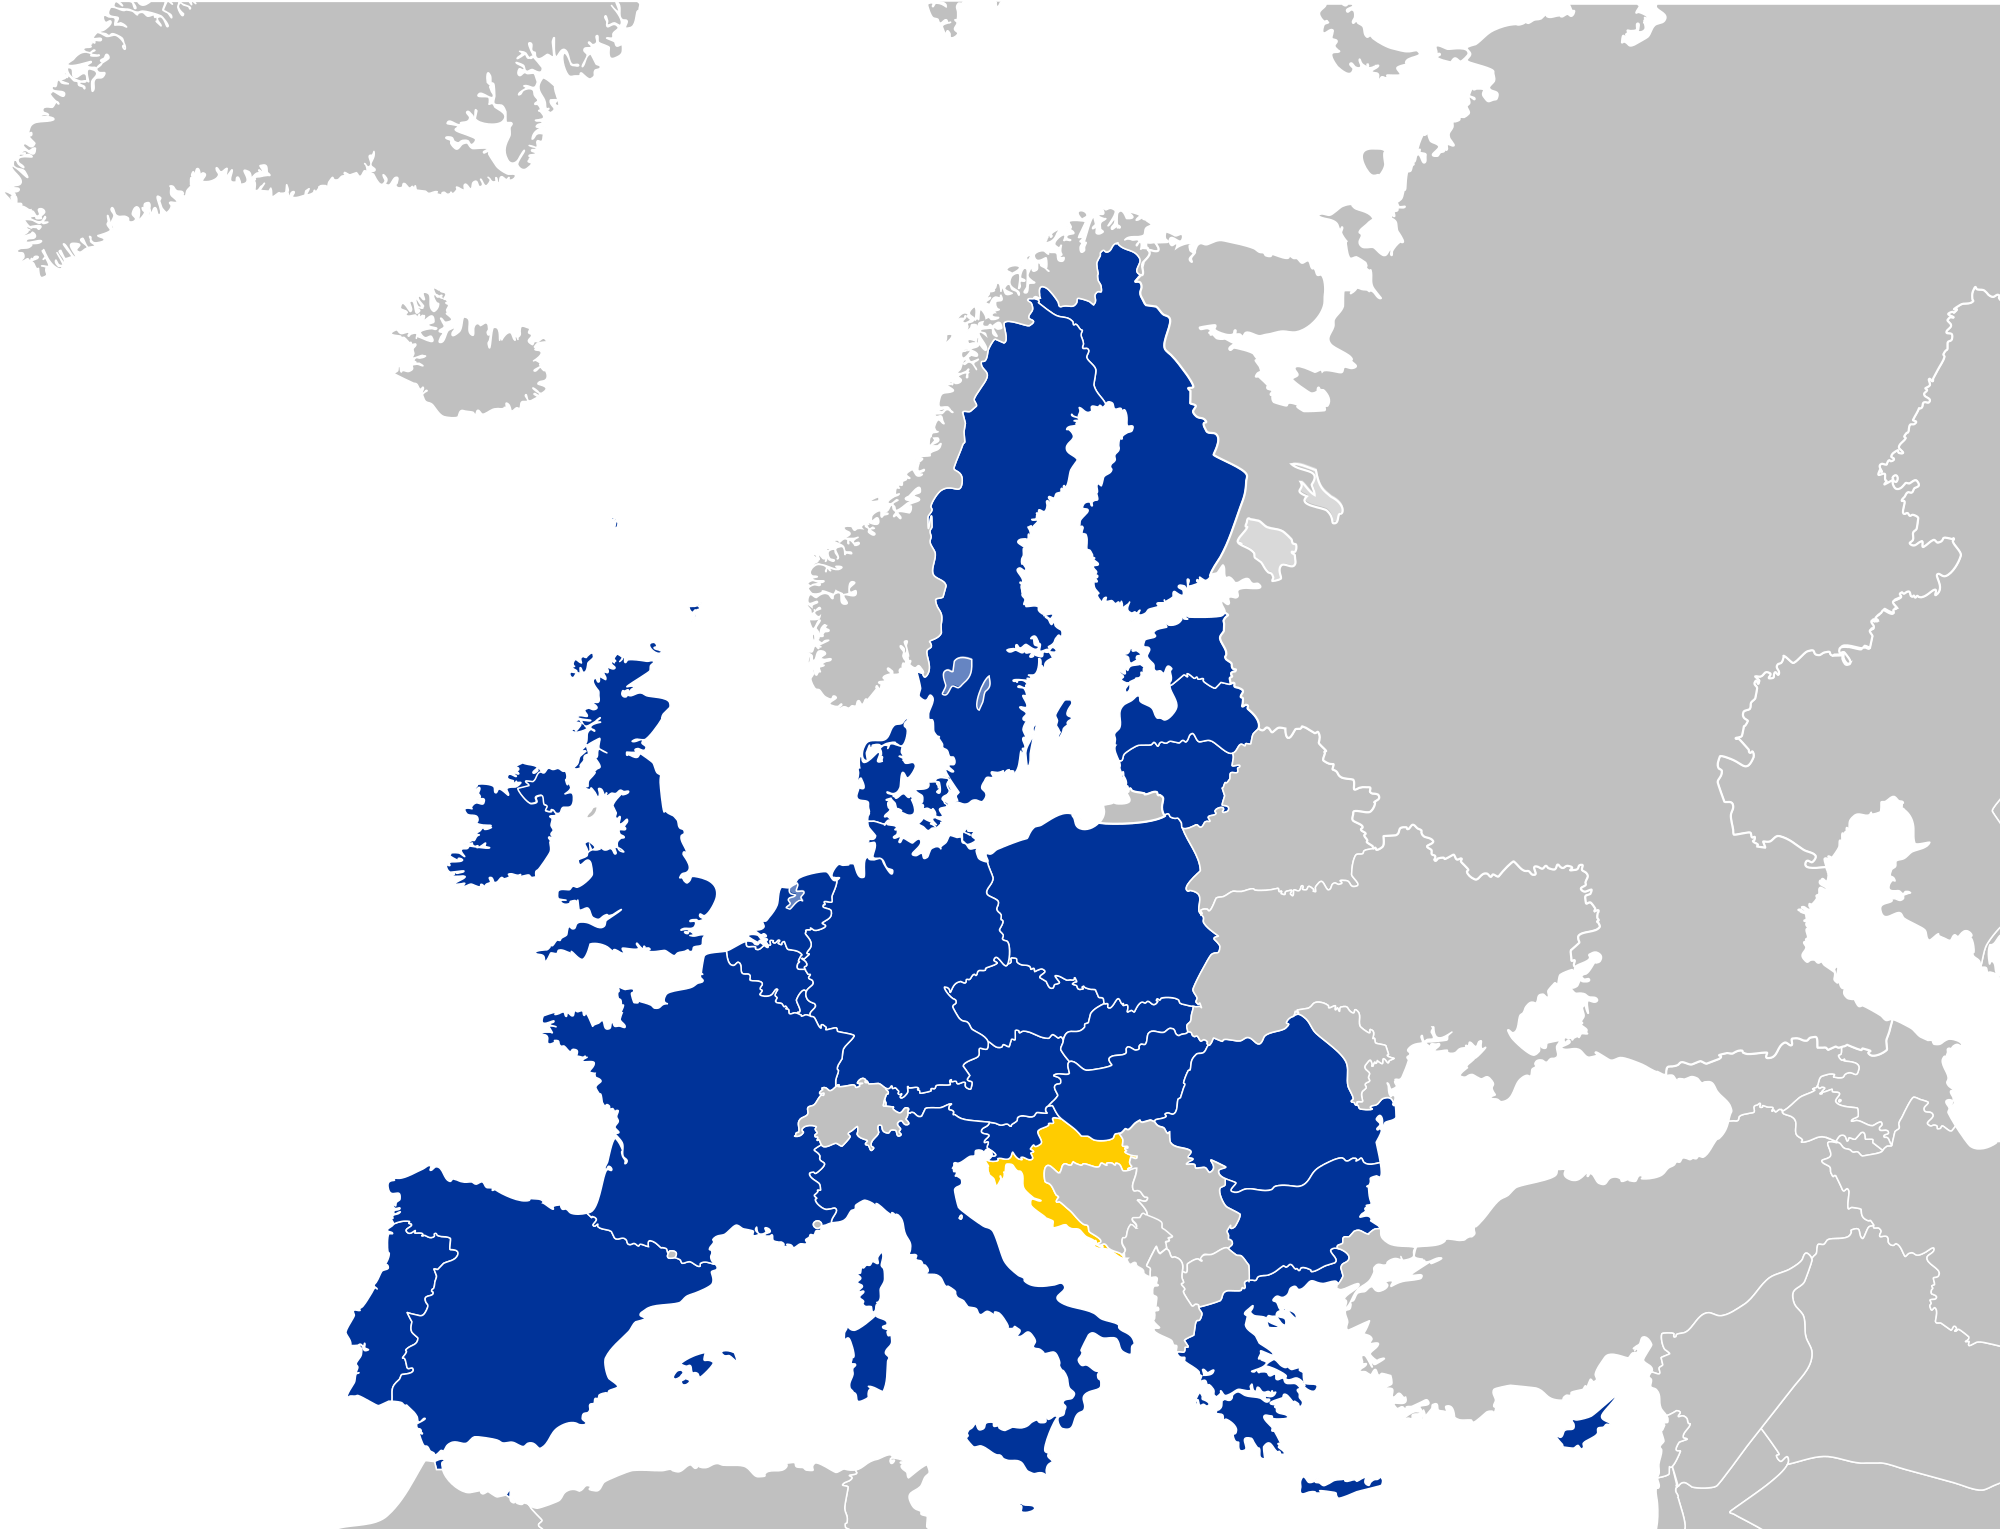 A map showing which European countries are allowed to stream Paramount content